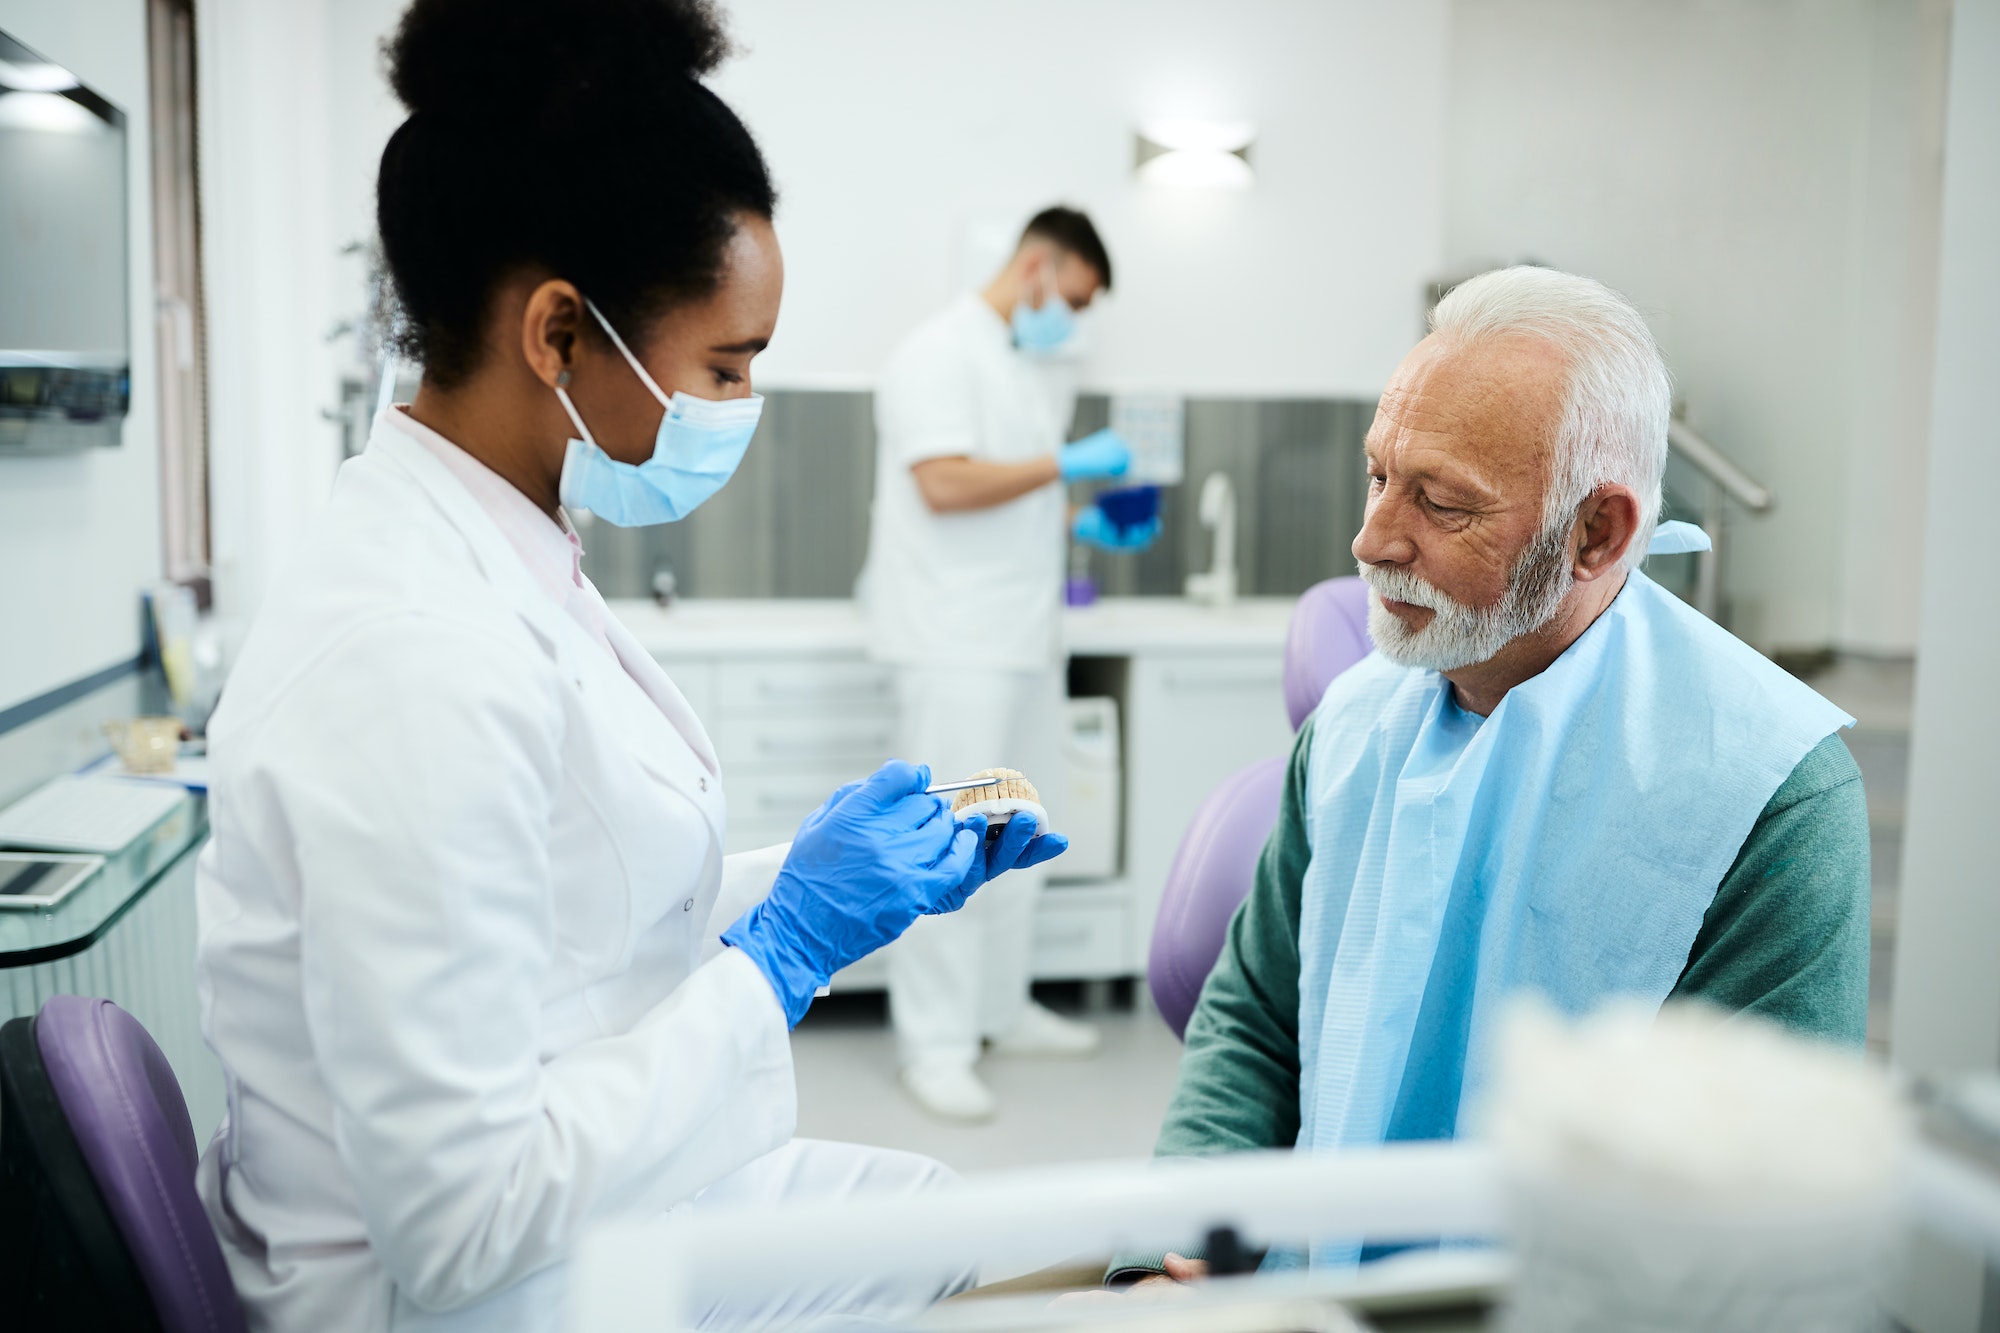 Black dentist using artificial dentures while communicating with senior patient at dentist's office.